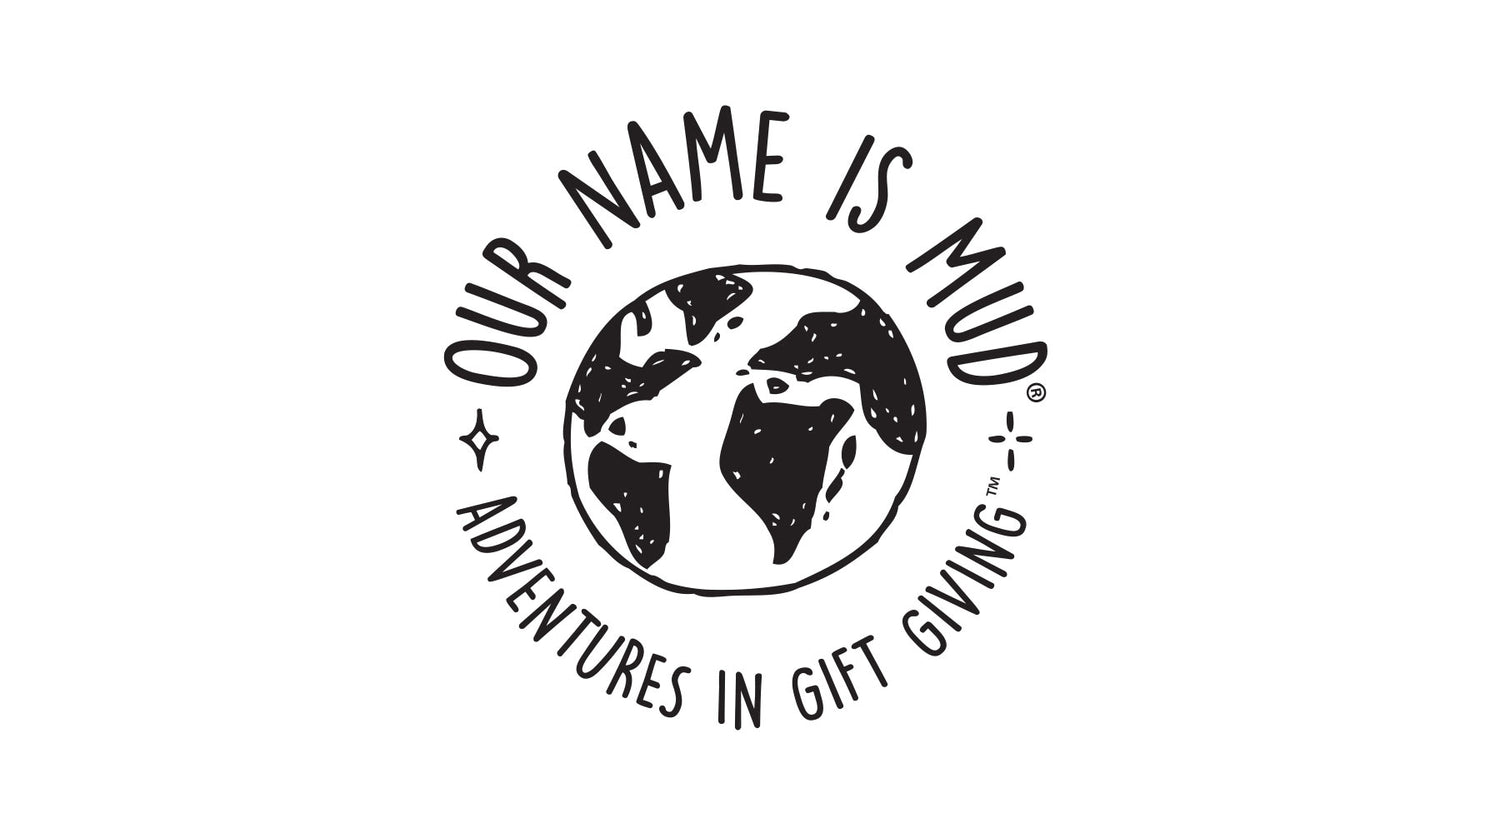 Our Name is Mud — Enesco Gift Shop